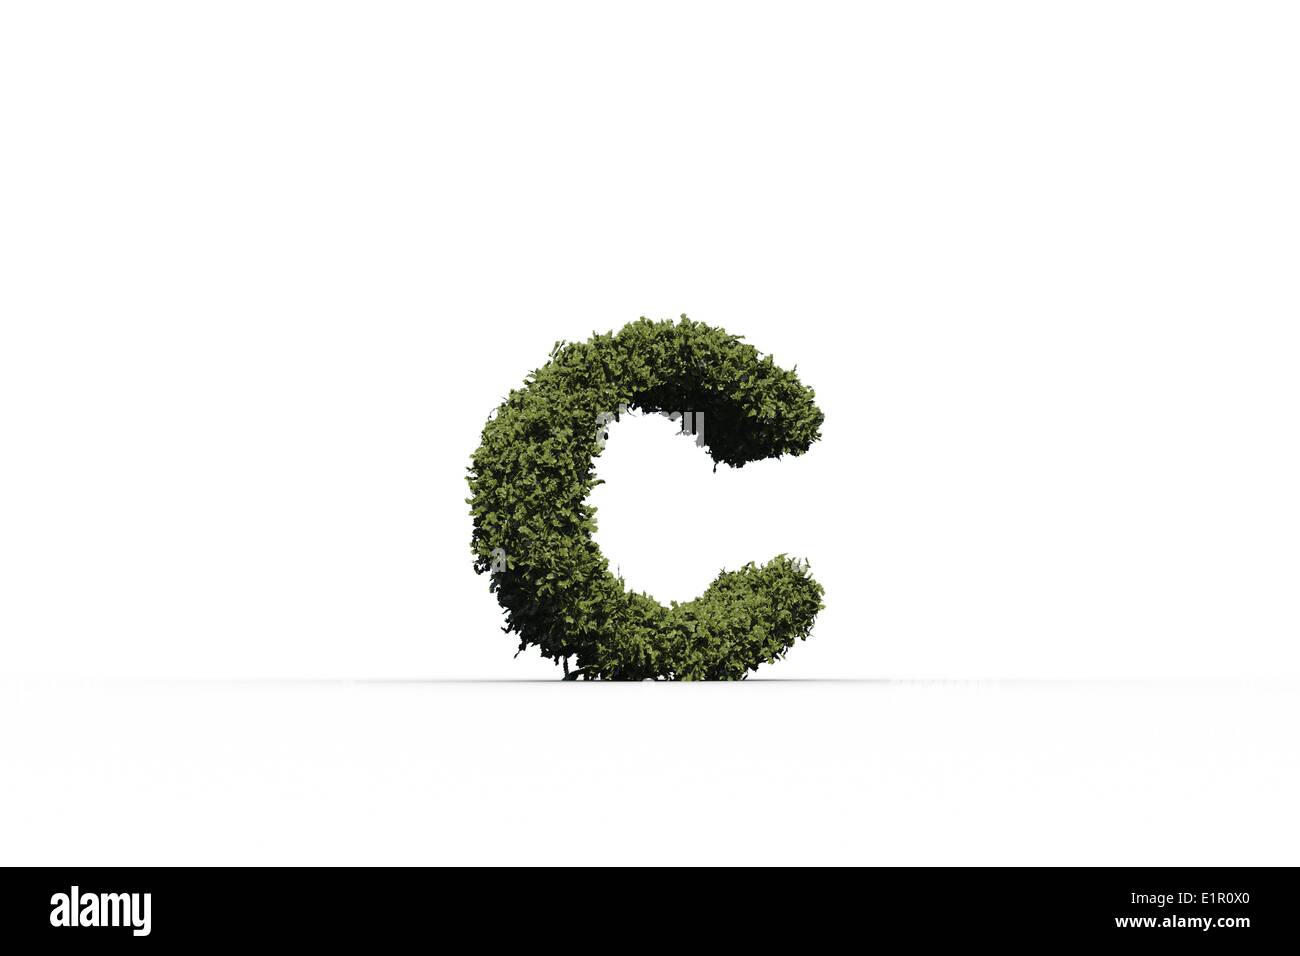 Letter c made of leaves Stock Photo